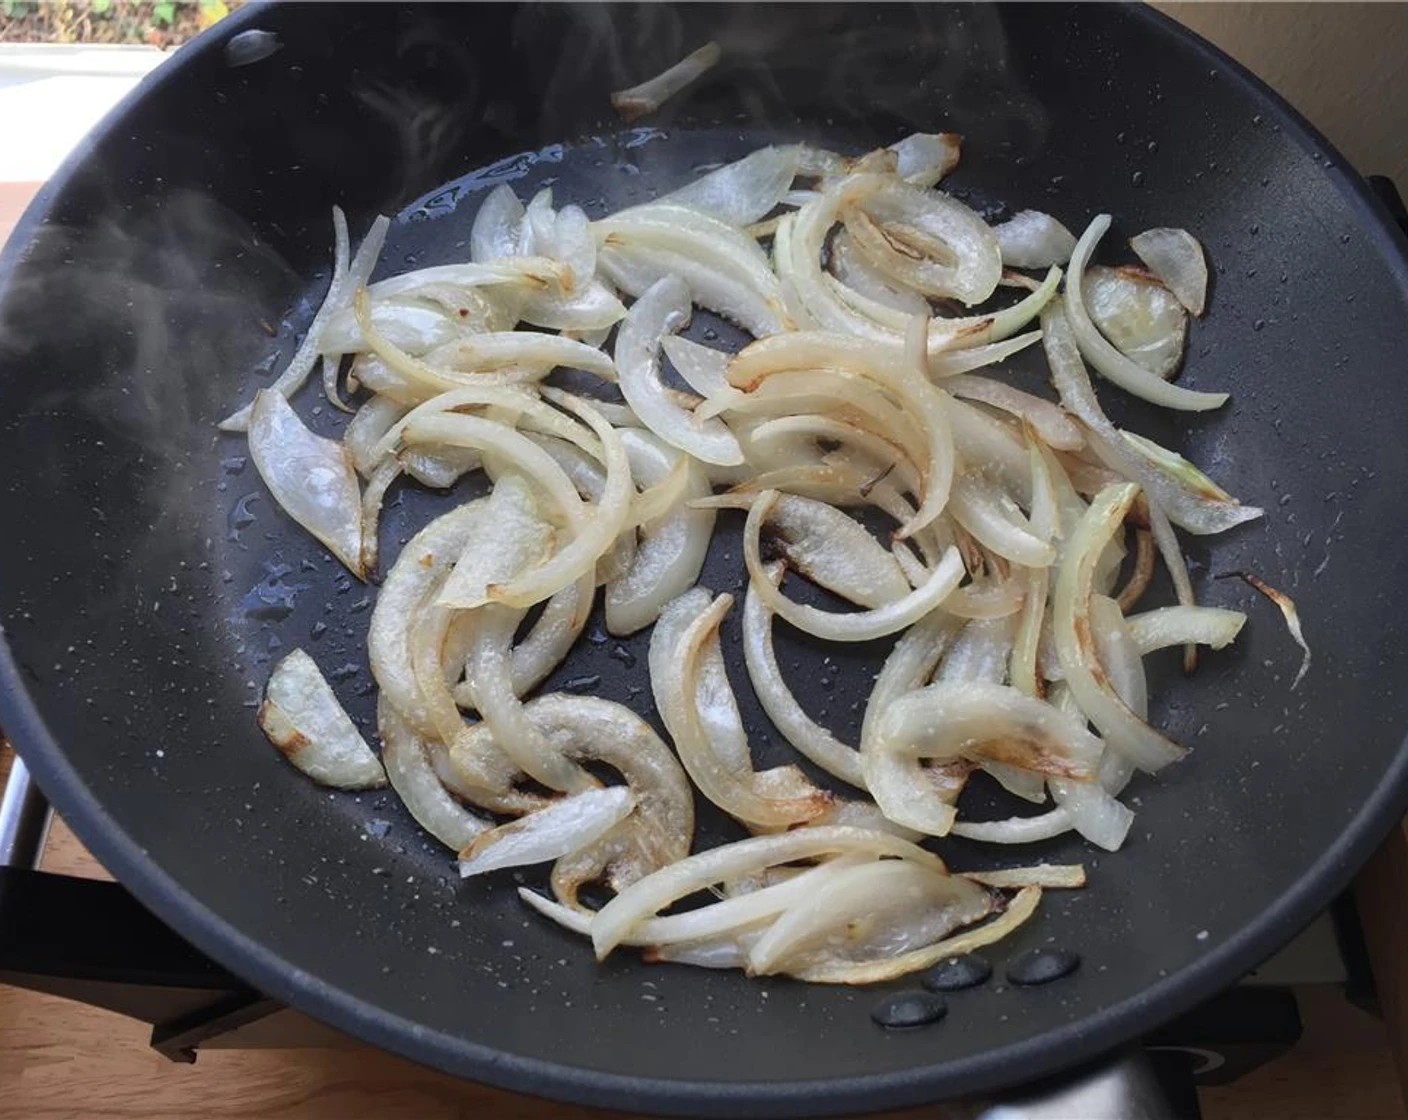 step 2 To a saute pan over medium-high heat, add the Olive Oil (1 tsp), and once shimmering, add the sliced onion. Toss a few times for 4 to 5 minutes to get some color on them. If the pan seems too hot, lower to medium.